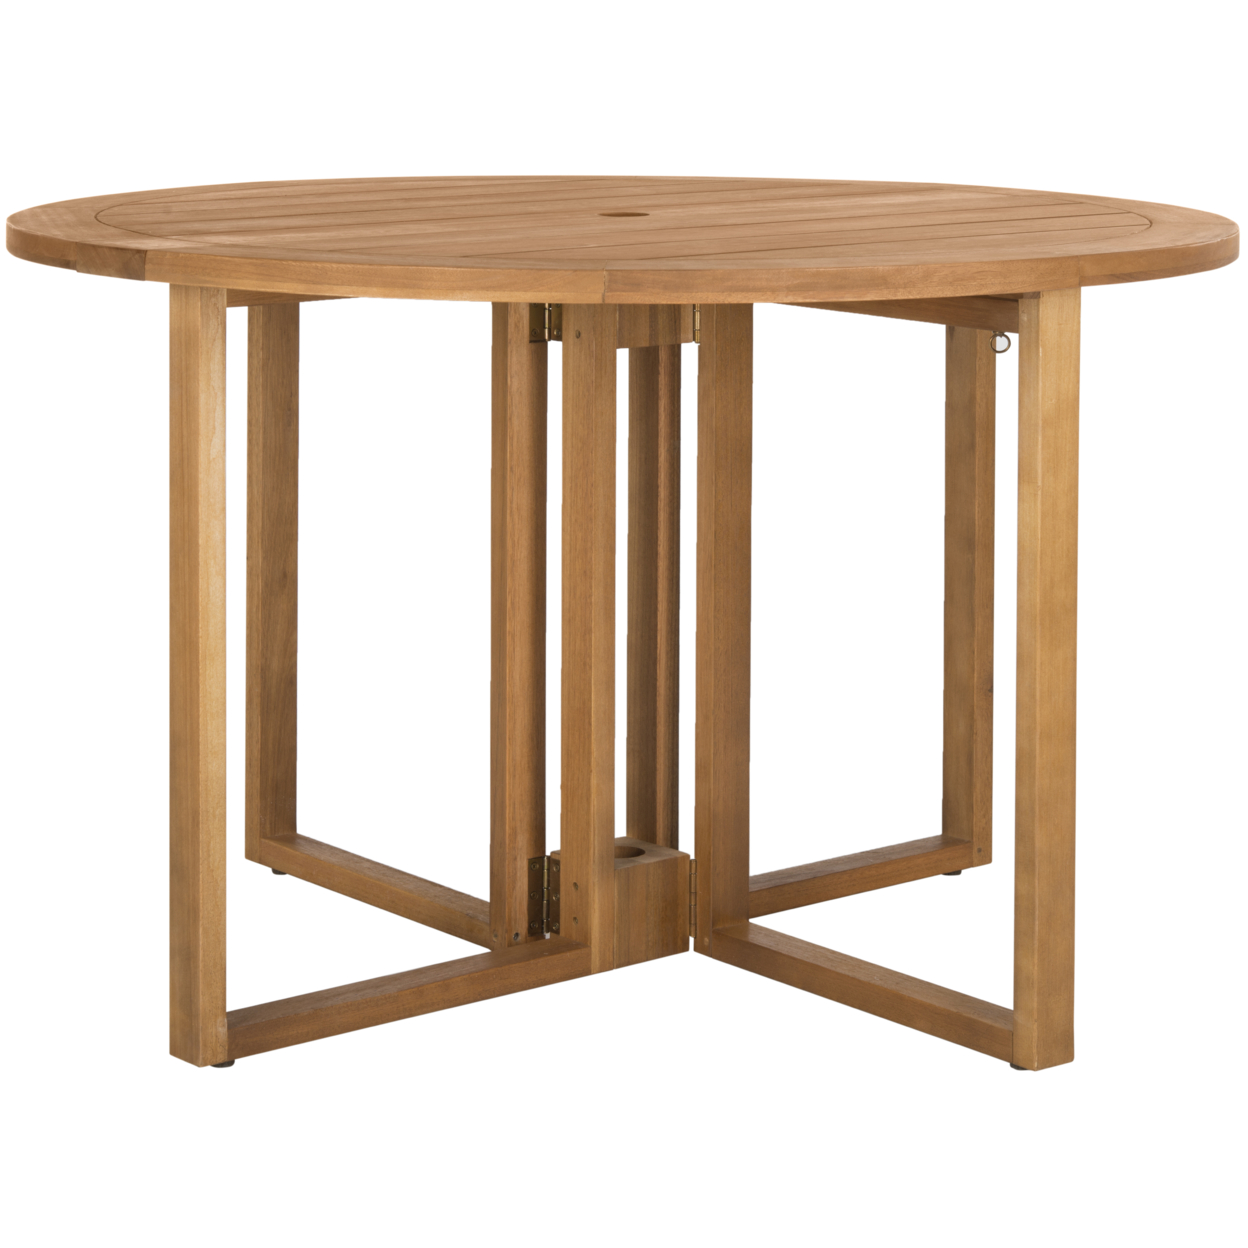 SAFAVIEH Outdoor Collection Wales Round 47.24 Inch Diameter Dining Table Natural